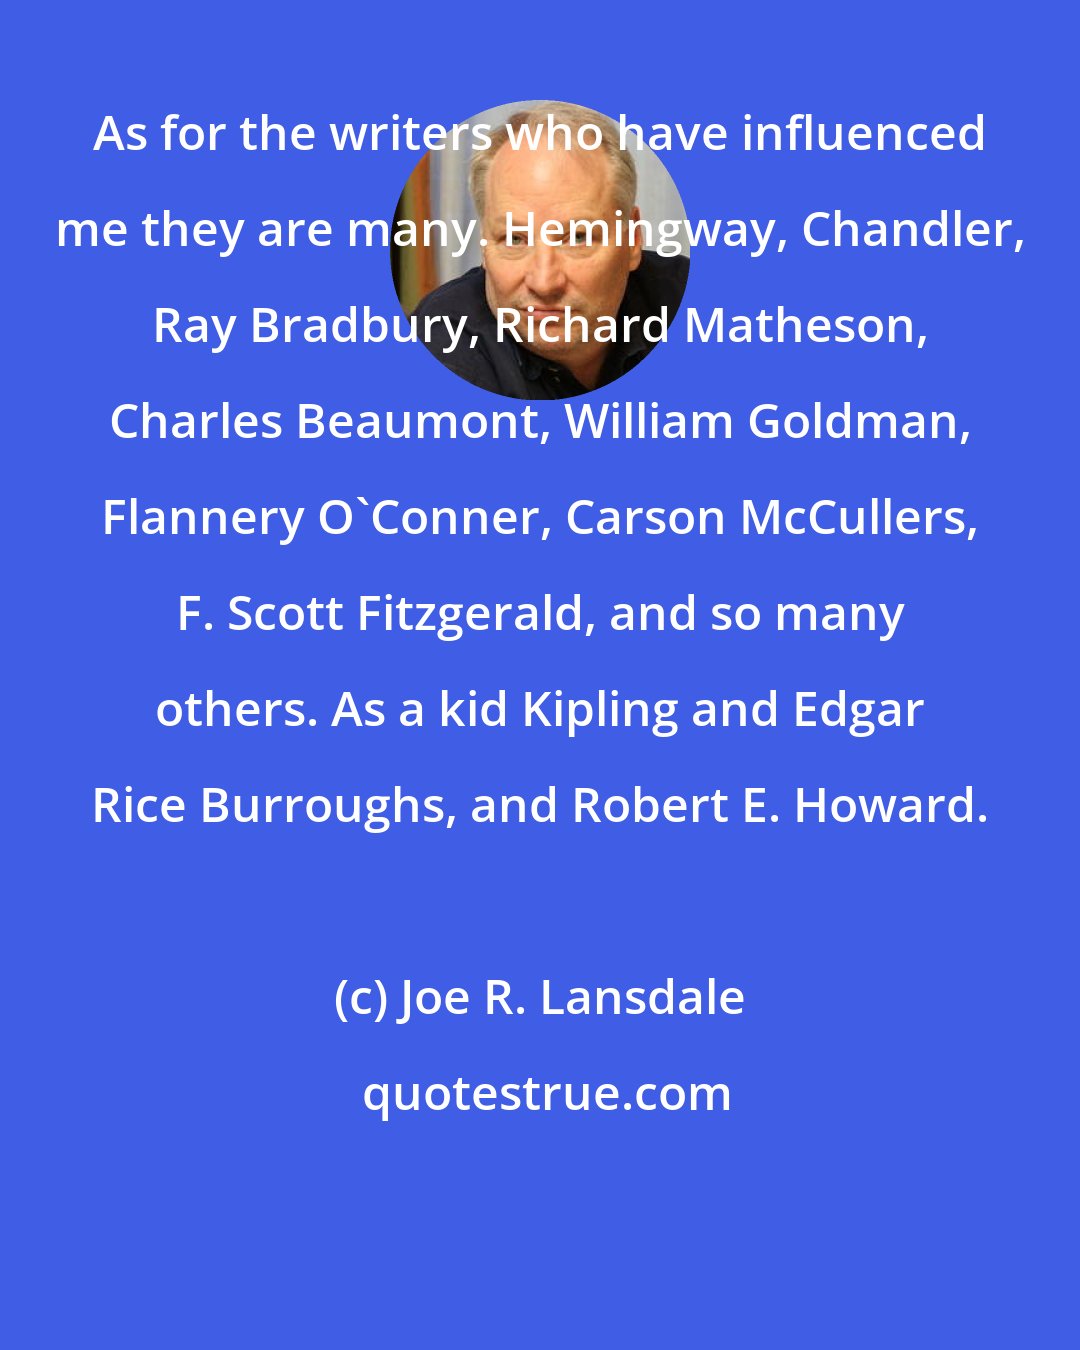 Joe R. Lansdale: As for the writers who have influenced me they are many. Hemingway, Chandler, Ray Bradbury, Richard Matheson, Charles Beaumont, William Goldman, Flannery O'Conner, Carson McCullers, F. Scott Fitzgerald, and so many others. As a kid Kipling and Edgar Rice Burroughs, and Robert E. Howard.